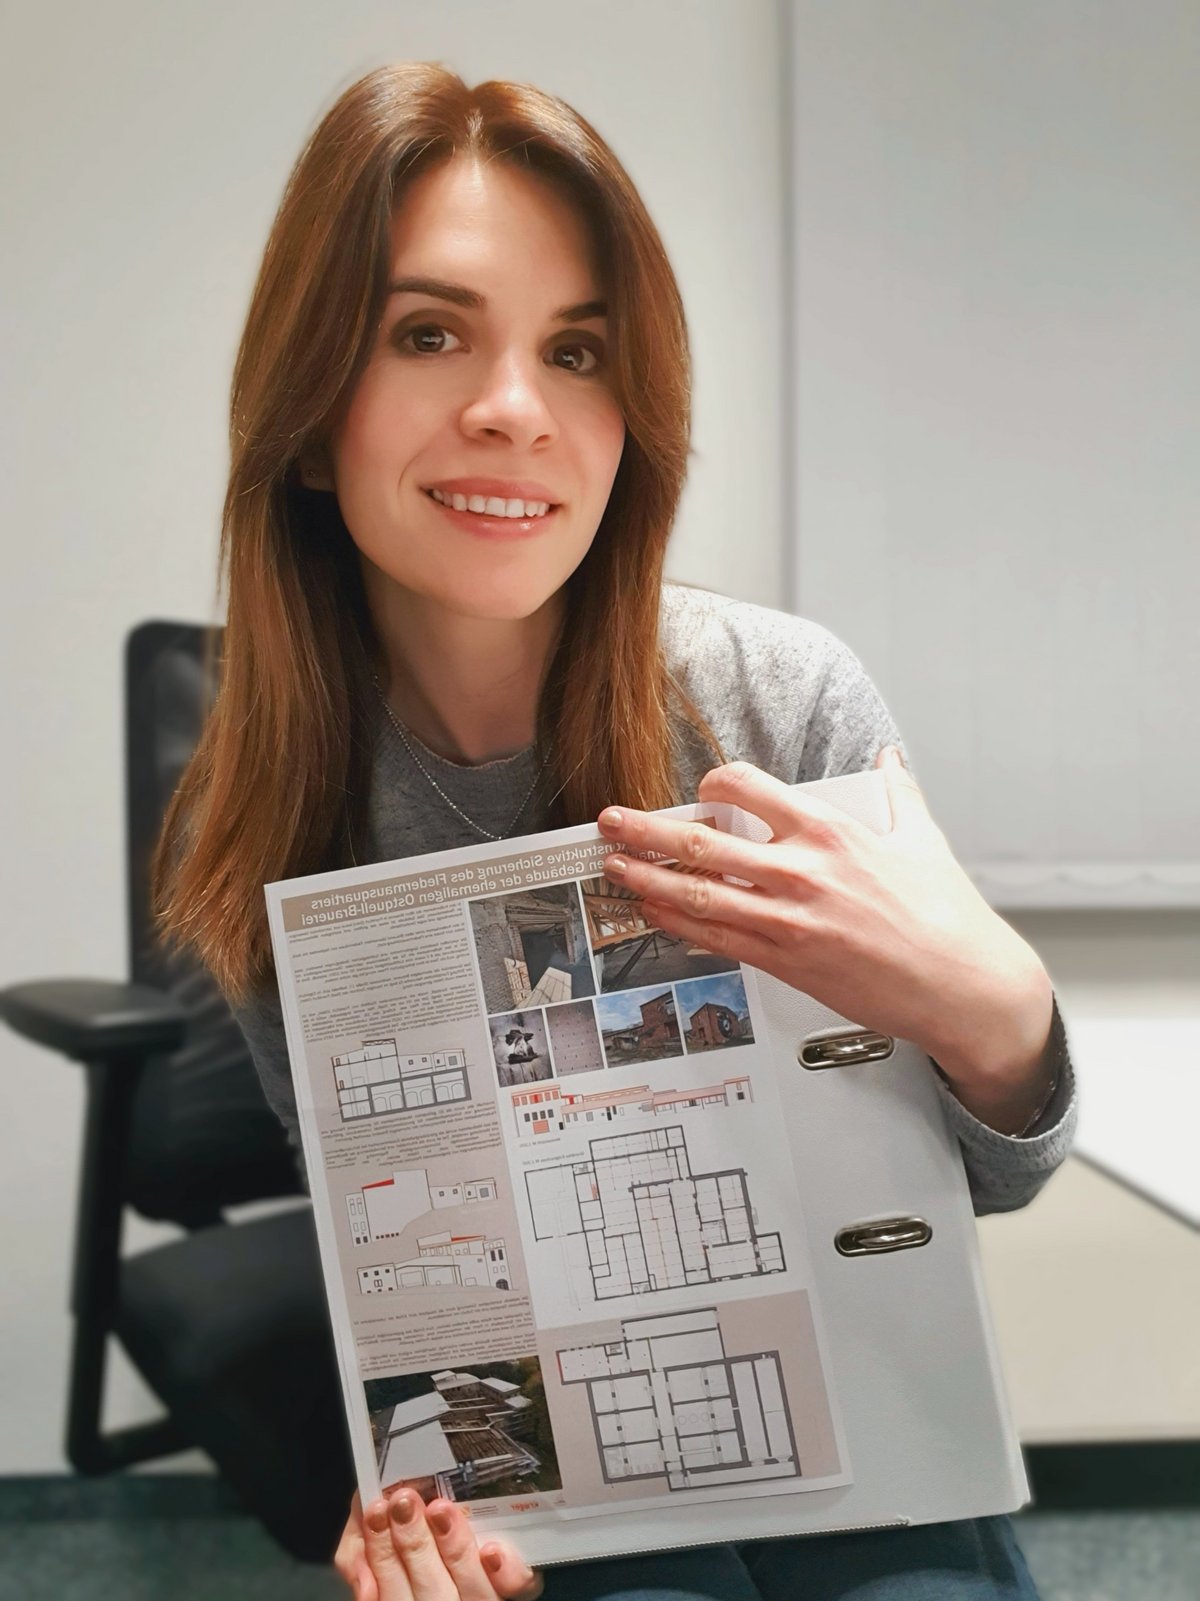 Liudmila with construction magazine in hand